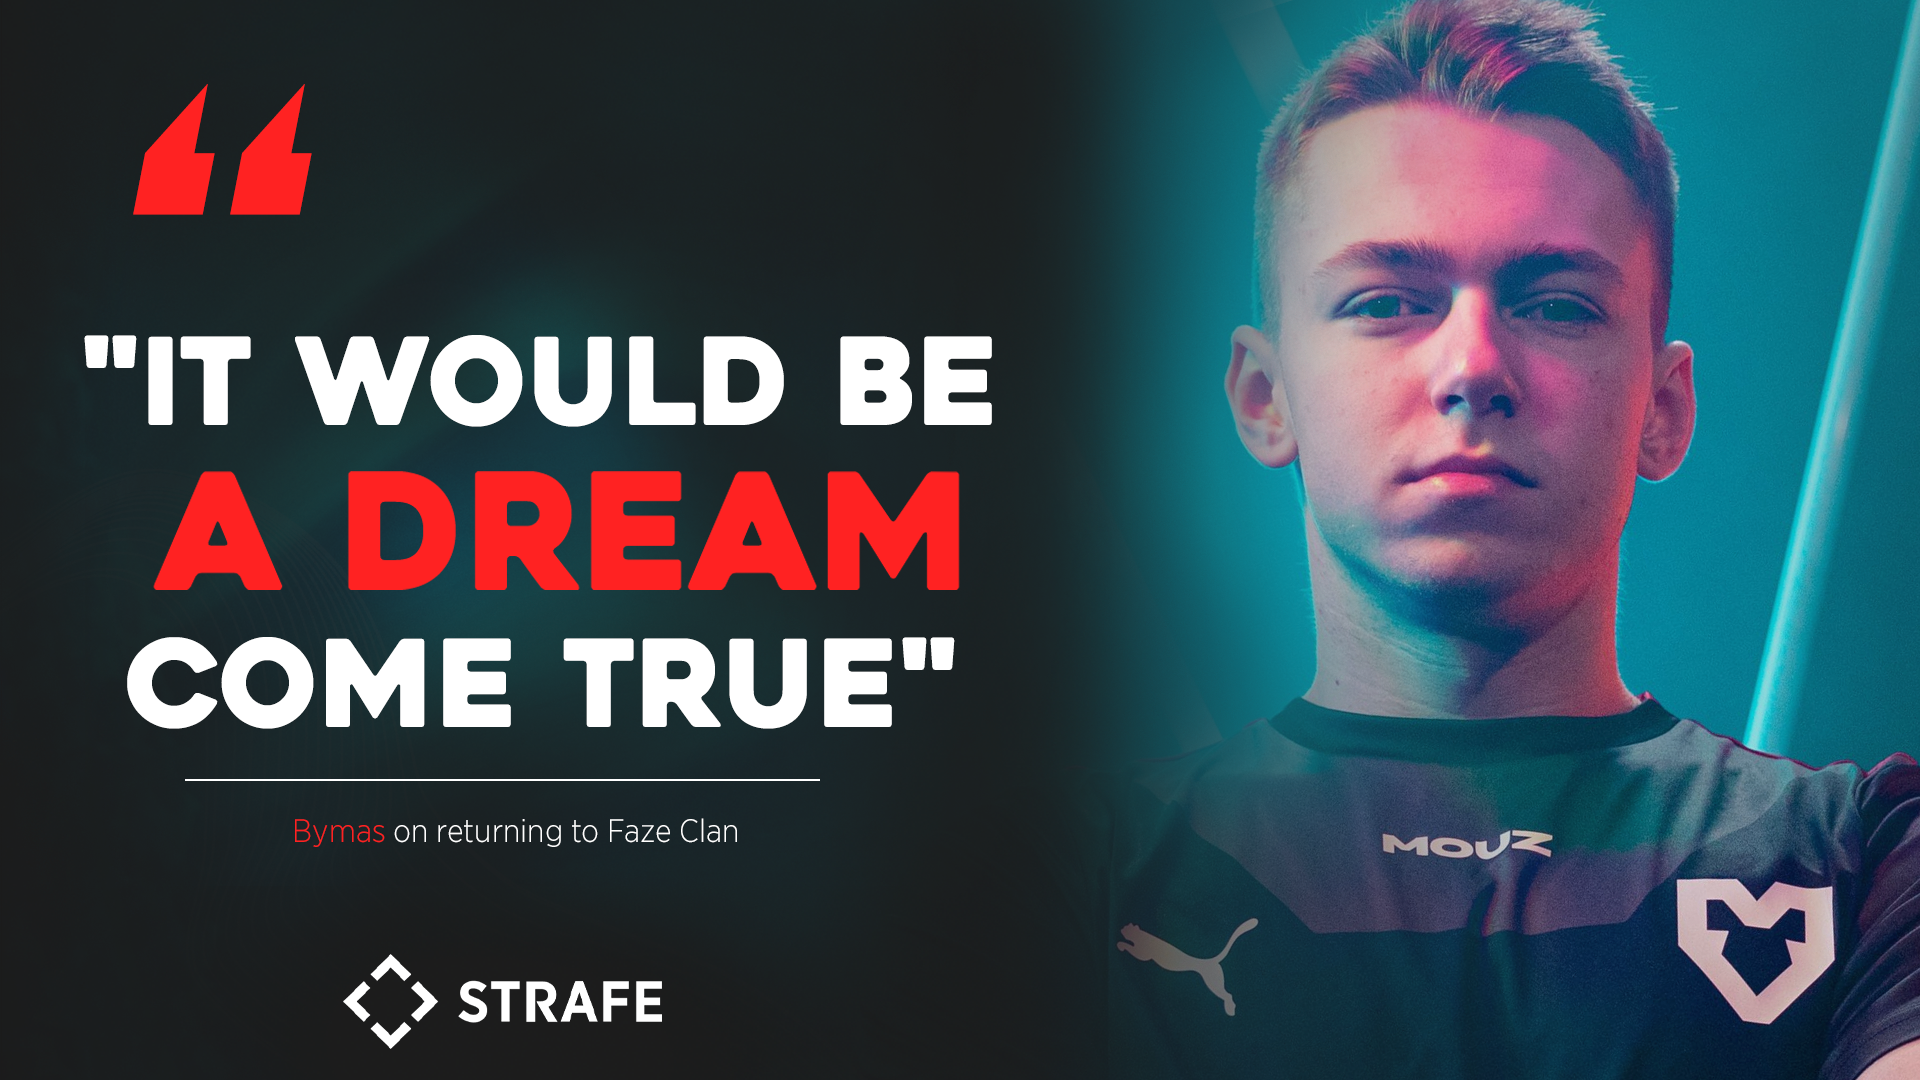 "It would be a dream come true", Bymas on returning to FaZe Clan some day